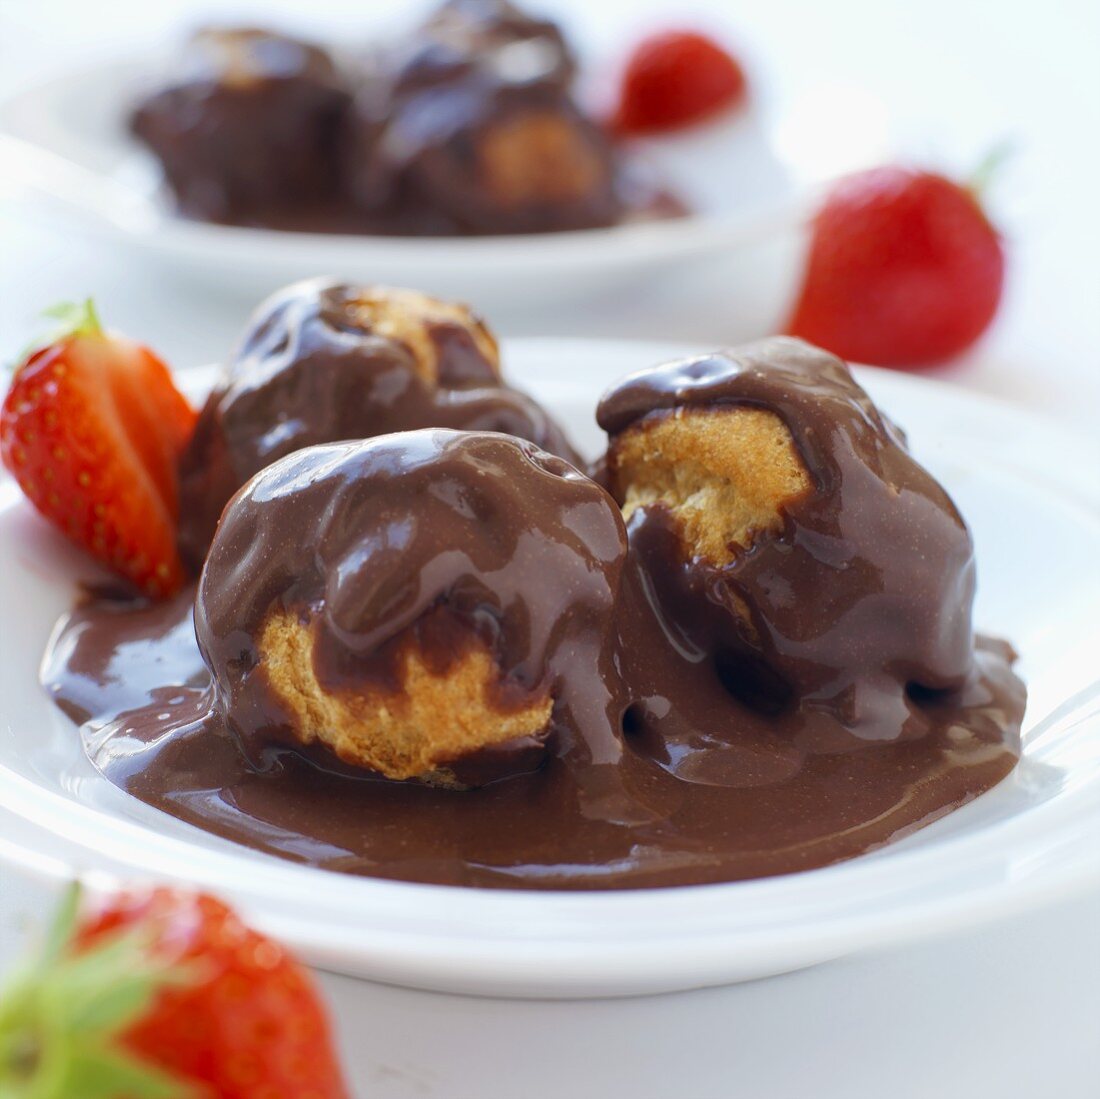 Profiteroles with chocolate sauce and strawberries